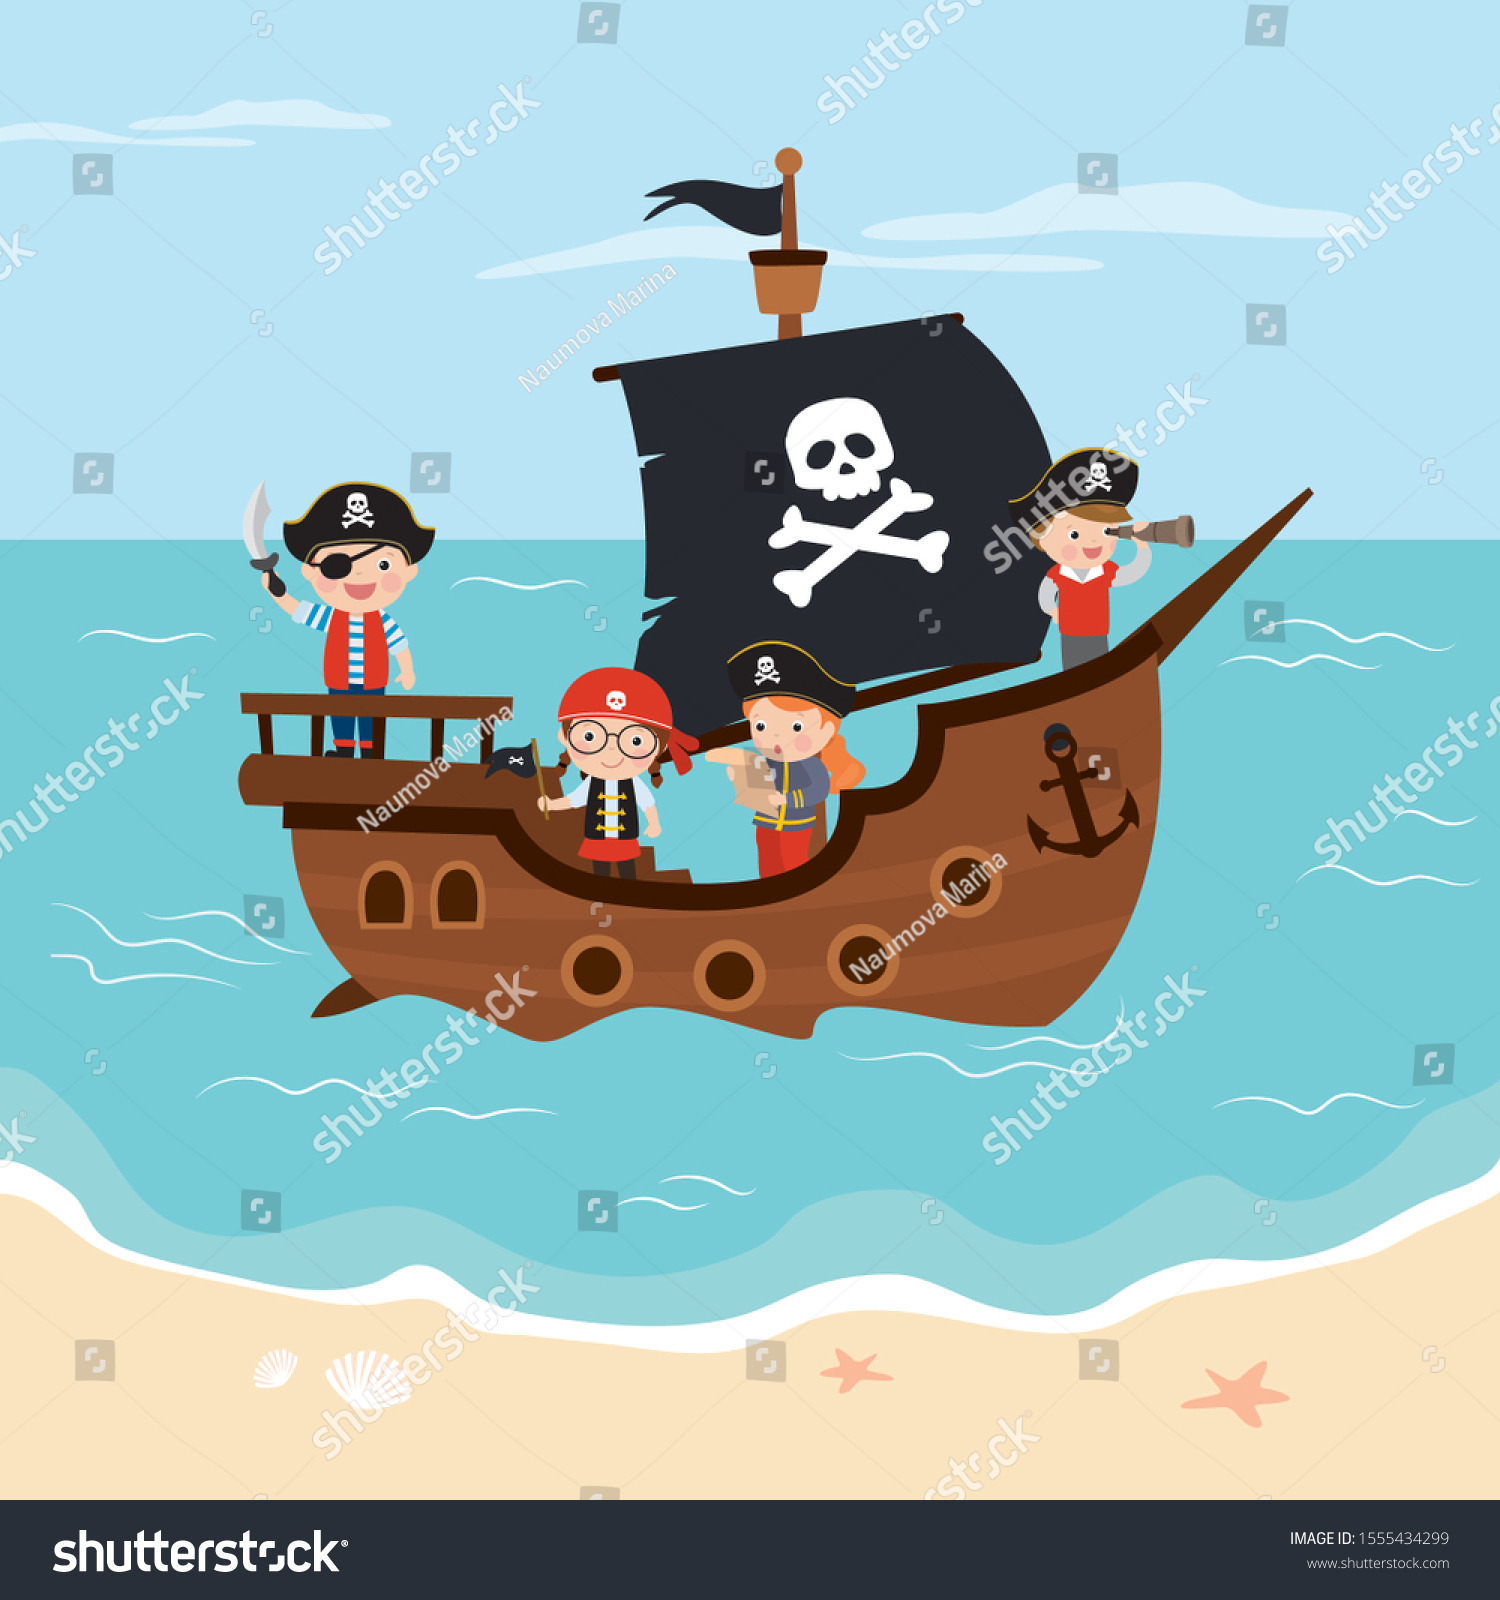 Funny Kids Pirates On Pirate Ship Stock Vector Royalty Free 1555434299